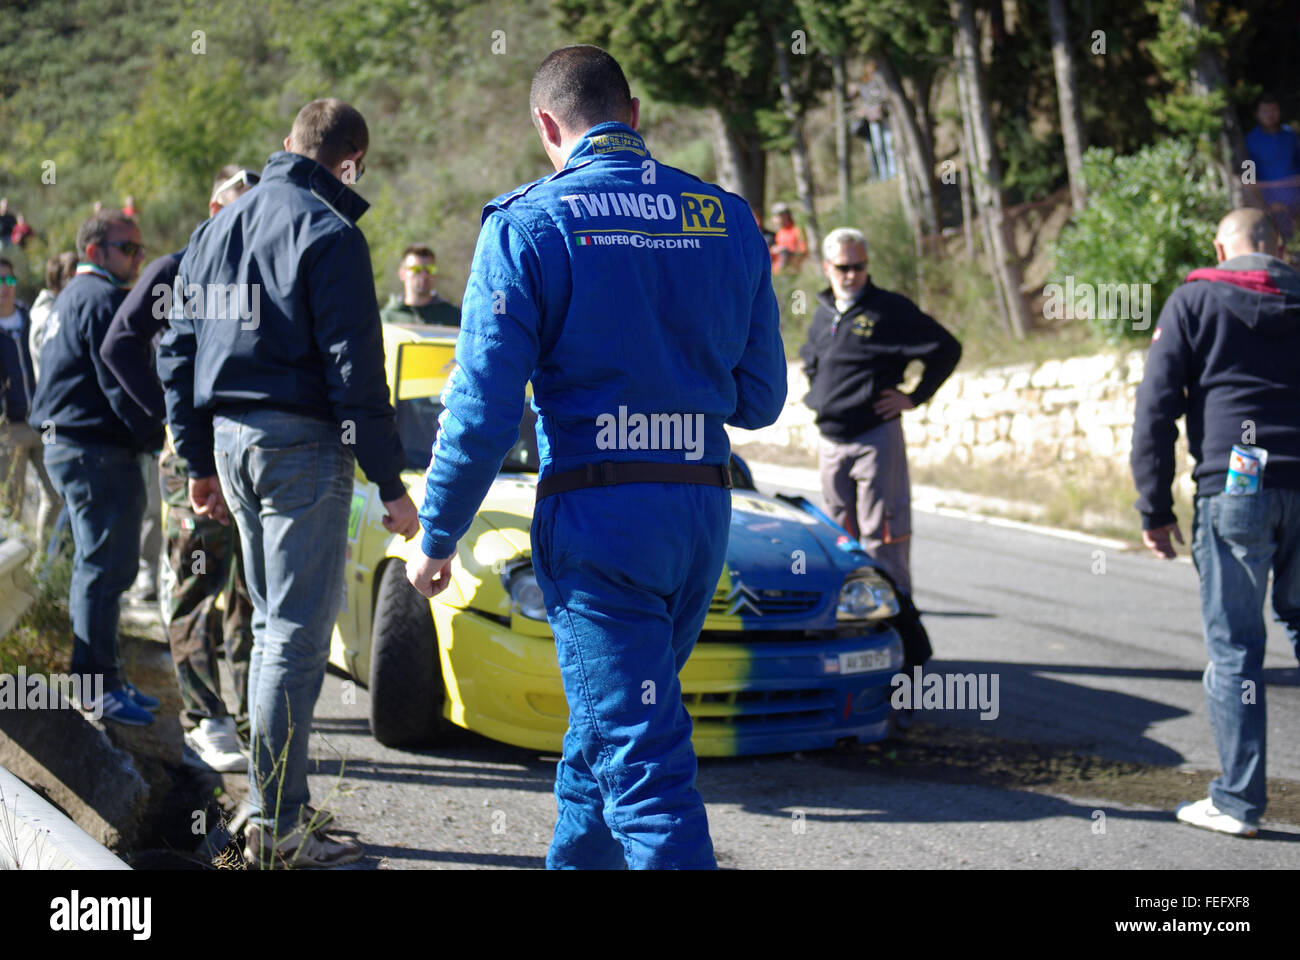 55th edition of the Rally Sanremo, European Rally Championship. Crashed car during race Stock Photo